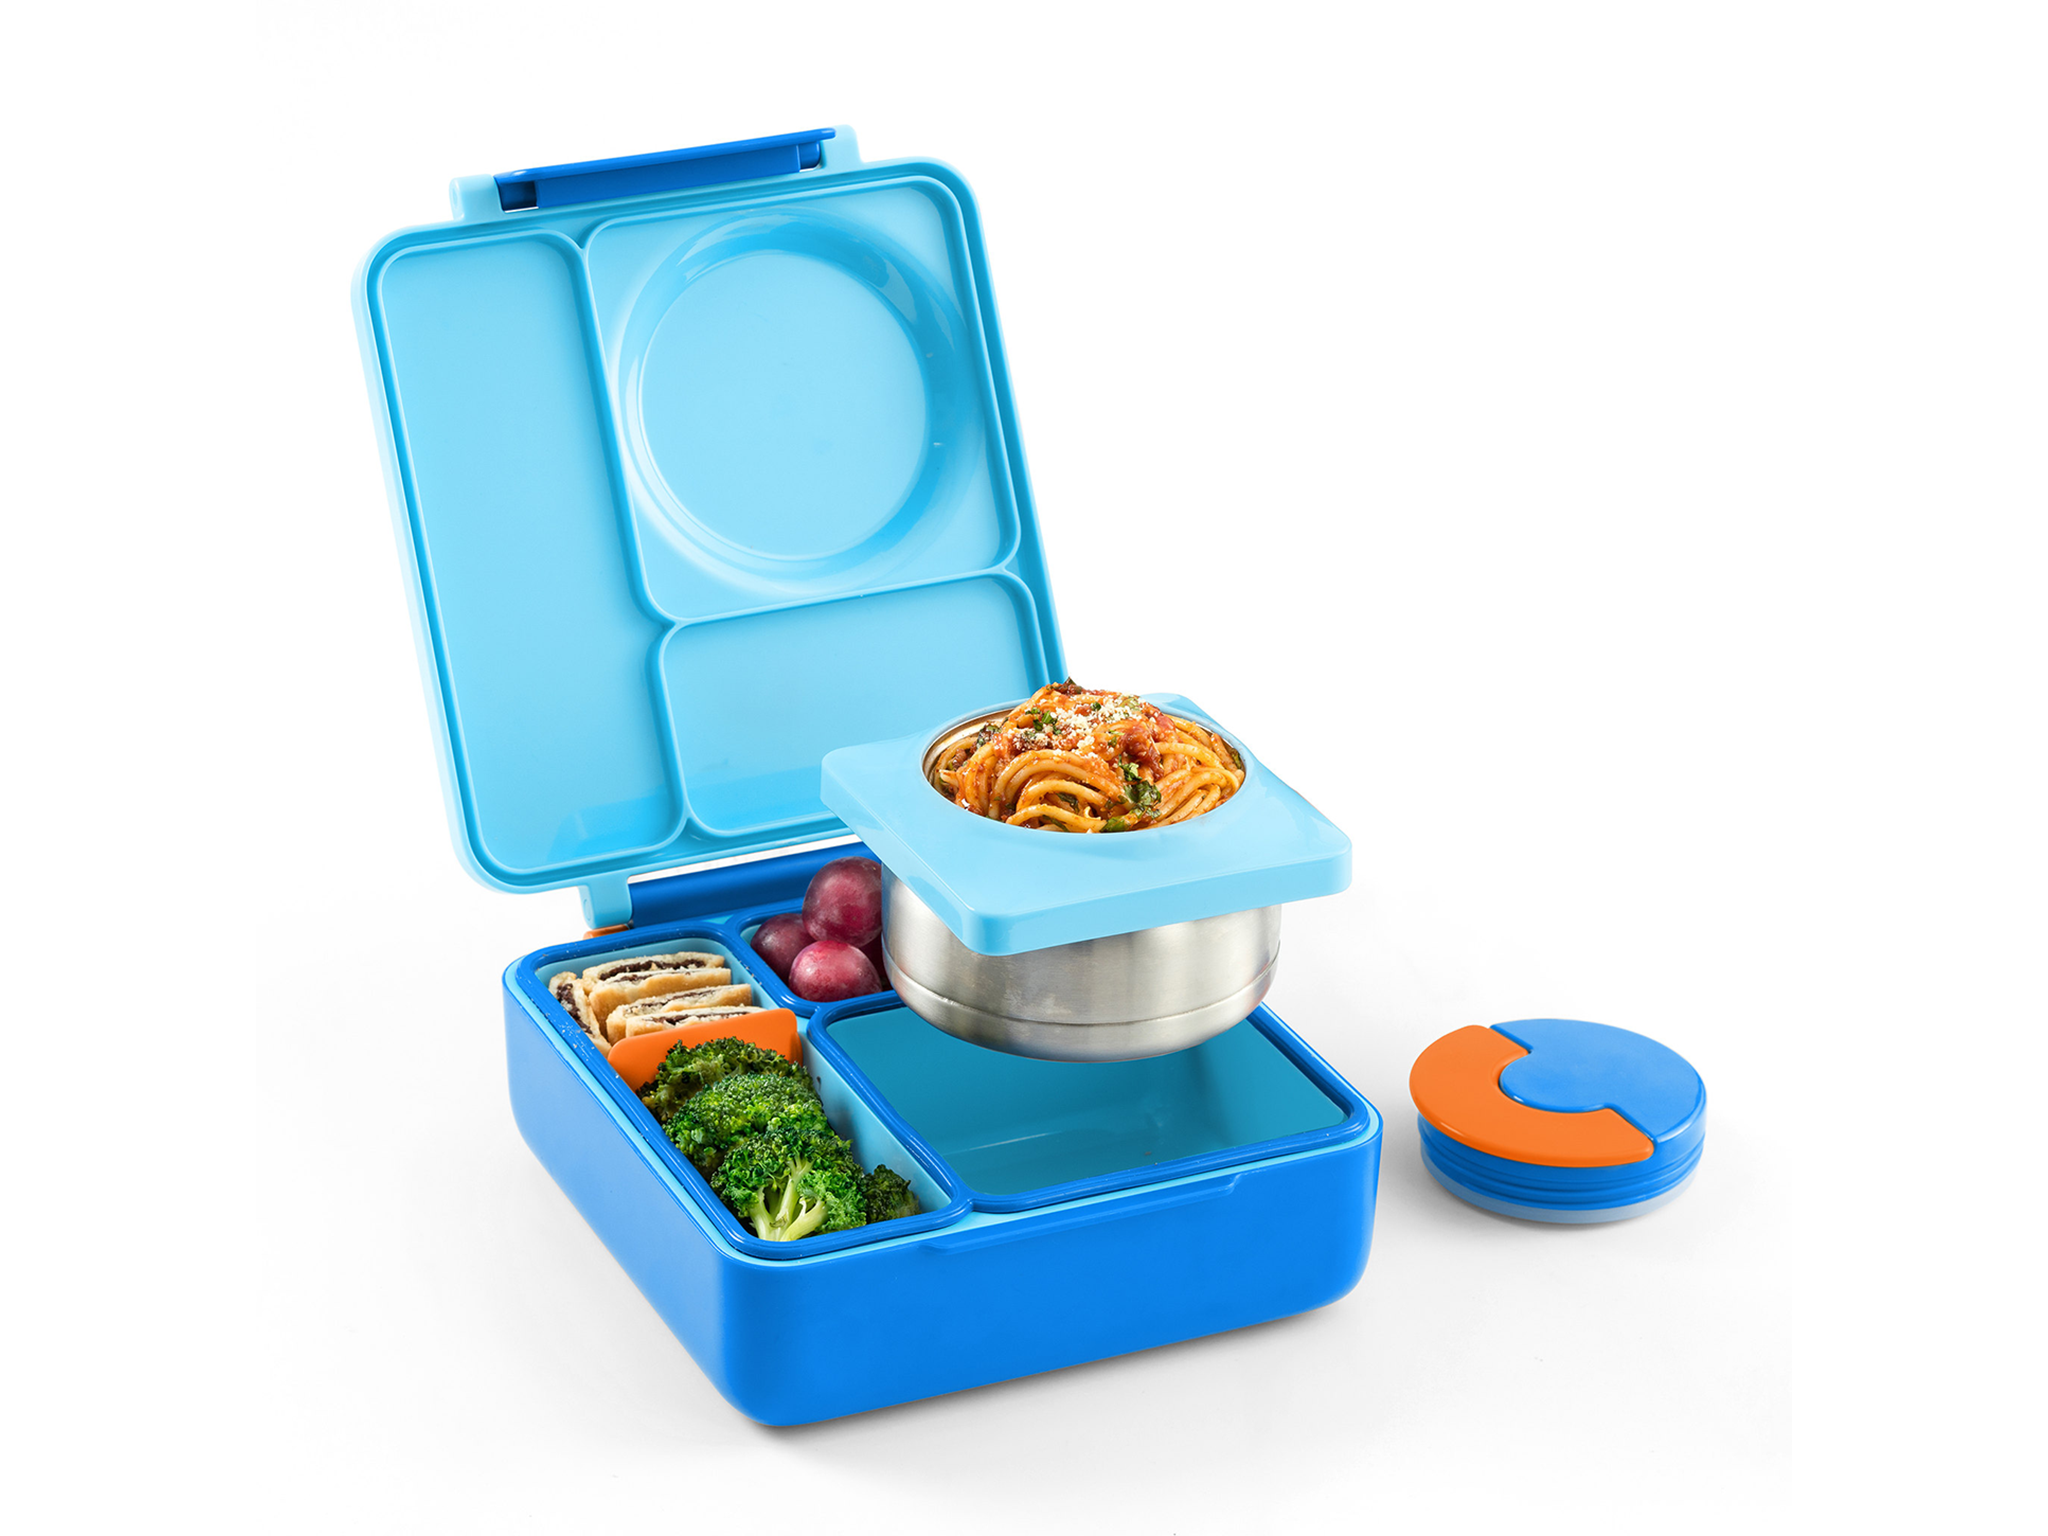 Women Adults Kids Fun Life Bento Lunch Box blue 5 Compartment Insulated Leakproof Meal Prep Container Eco-Friendly Reusable for Men 